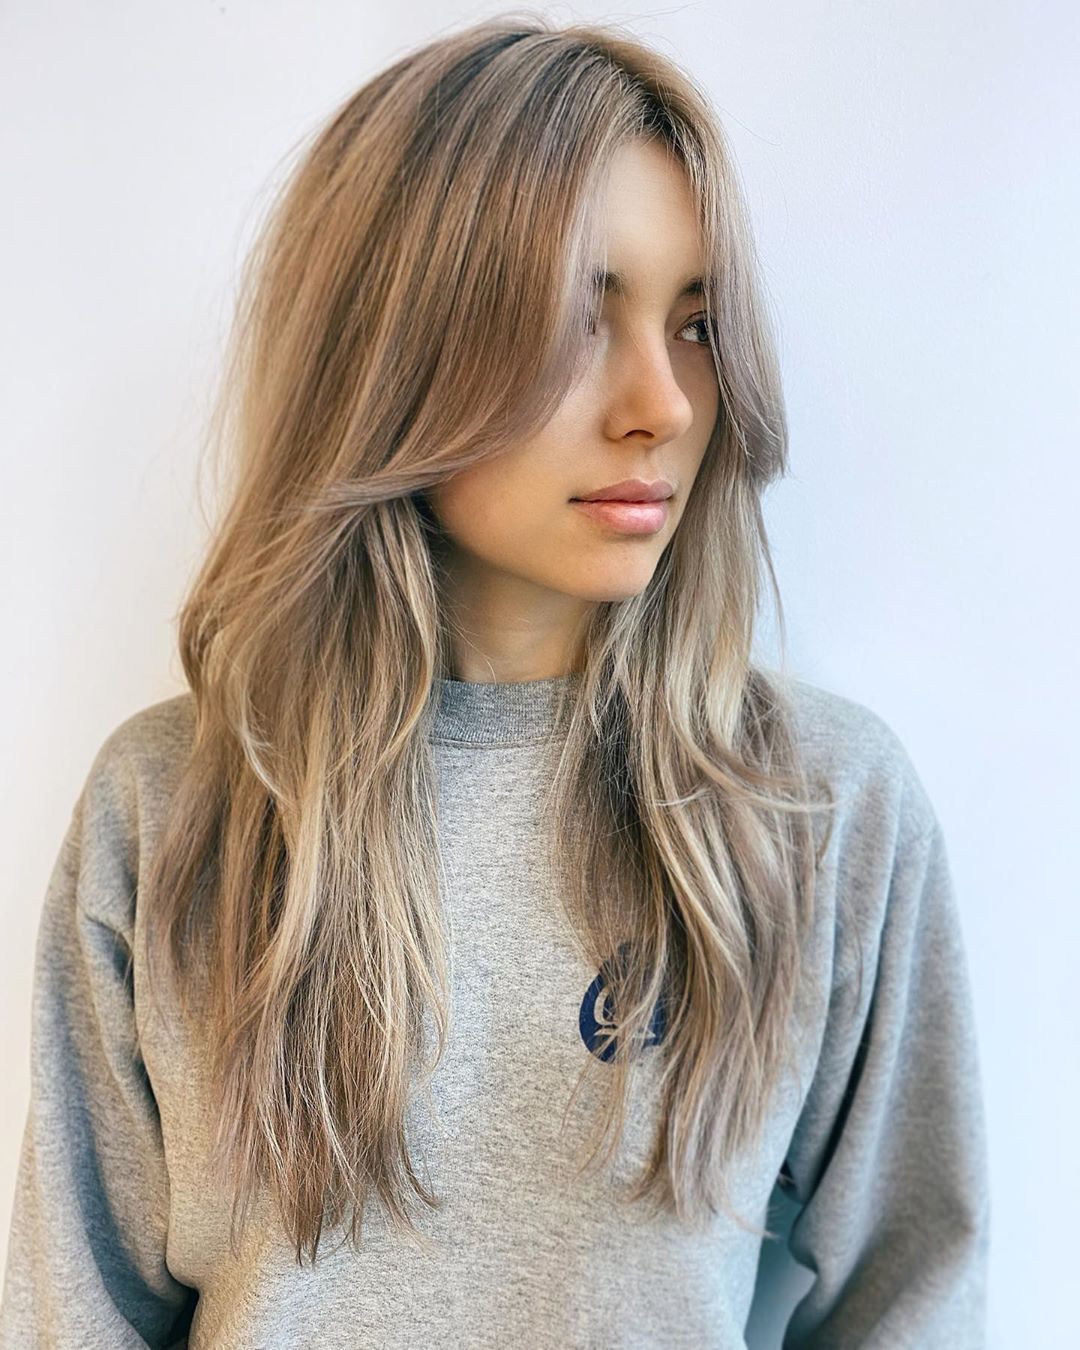 Long fringe and layered hairstyle